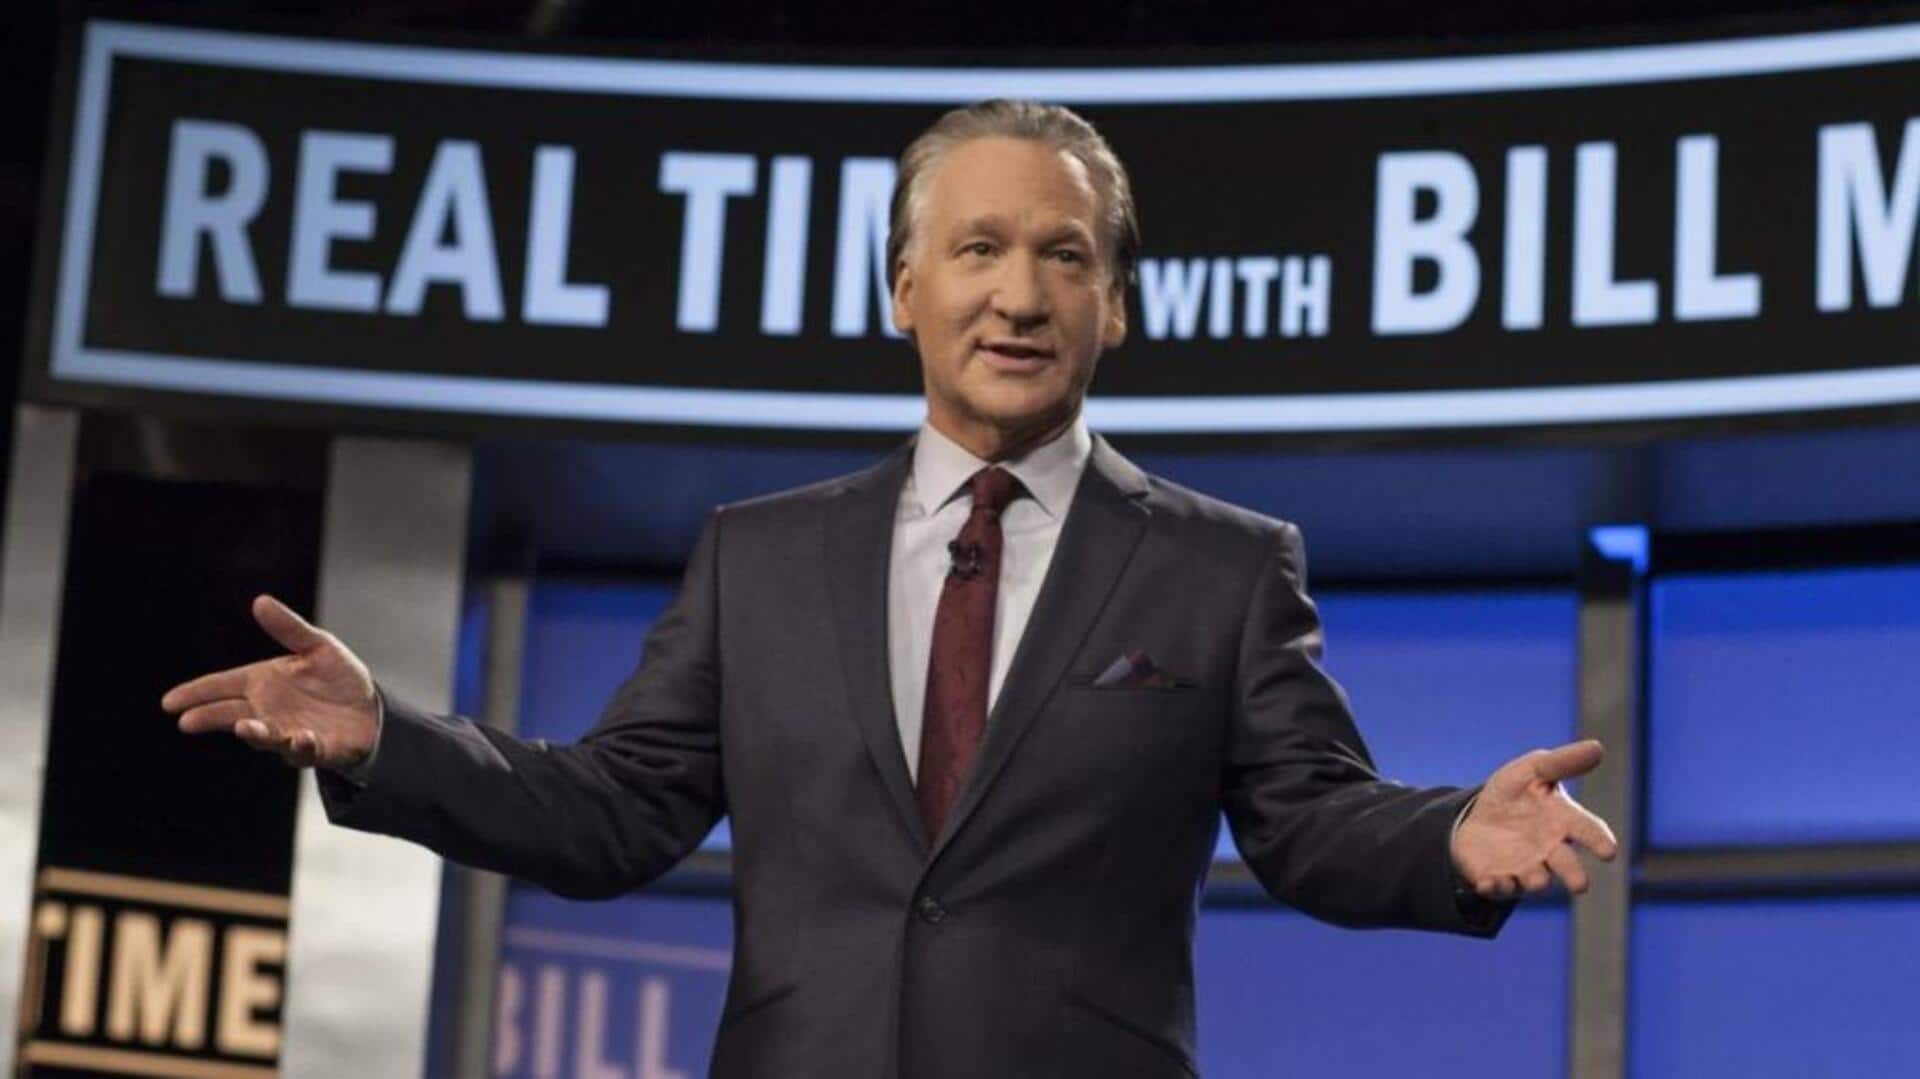 After Drew Barrymore, Bill Maher brings back his show—WGA reacts